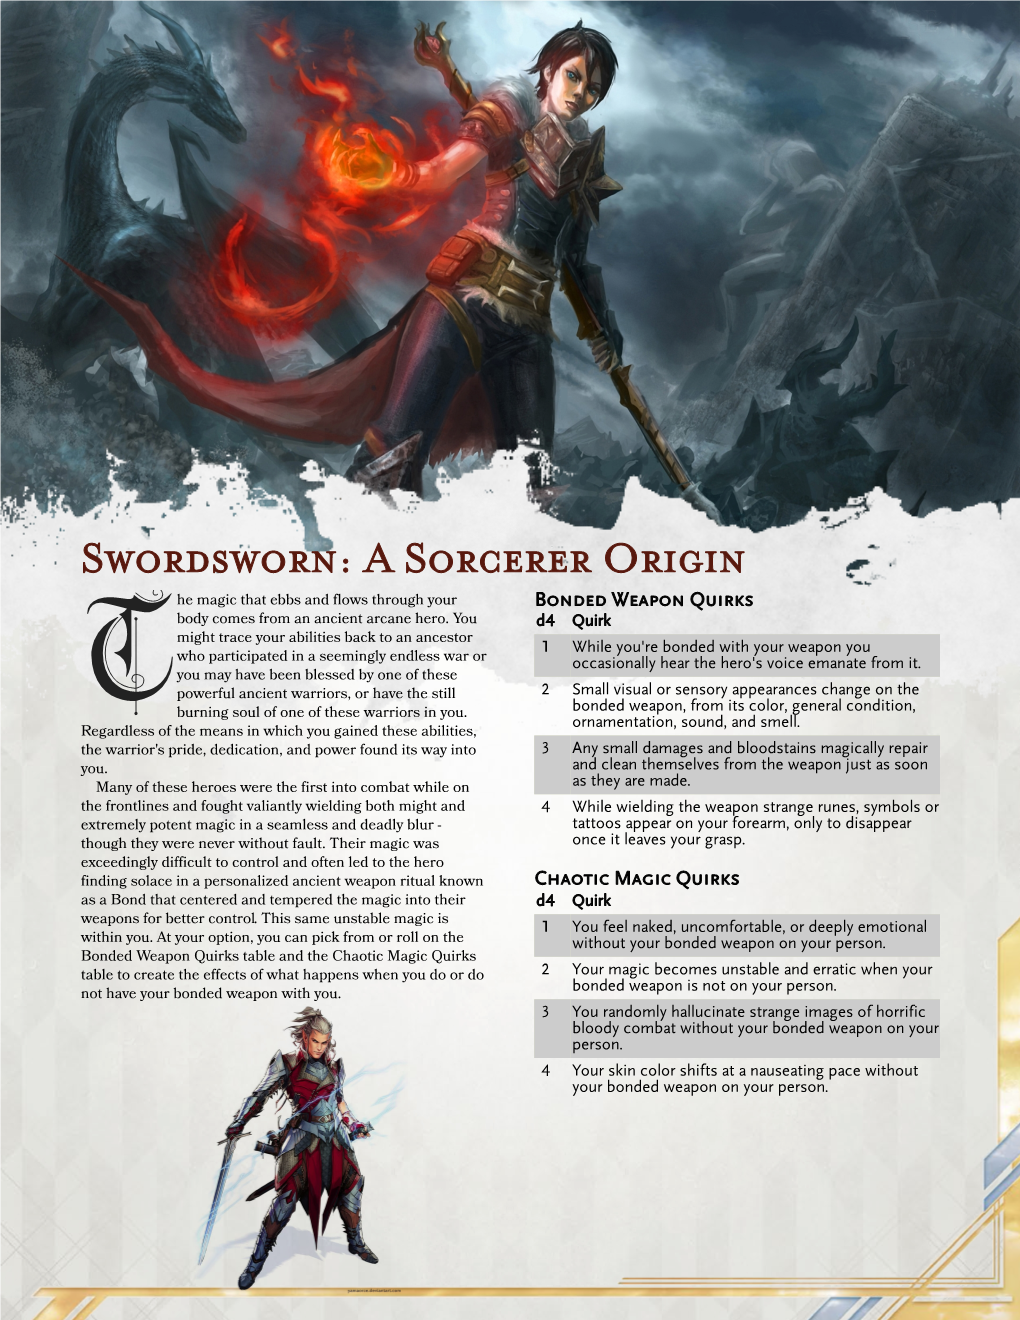 Swordsworn: a Sorcerer Origin He Magic That Ebbs and Flows Through Your Bonded Weapon Quirks Body Comes from an Ancient Arcane Hero